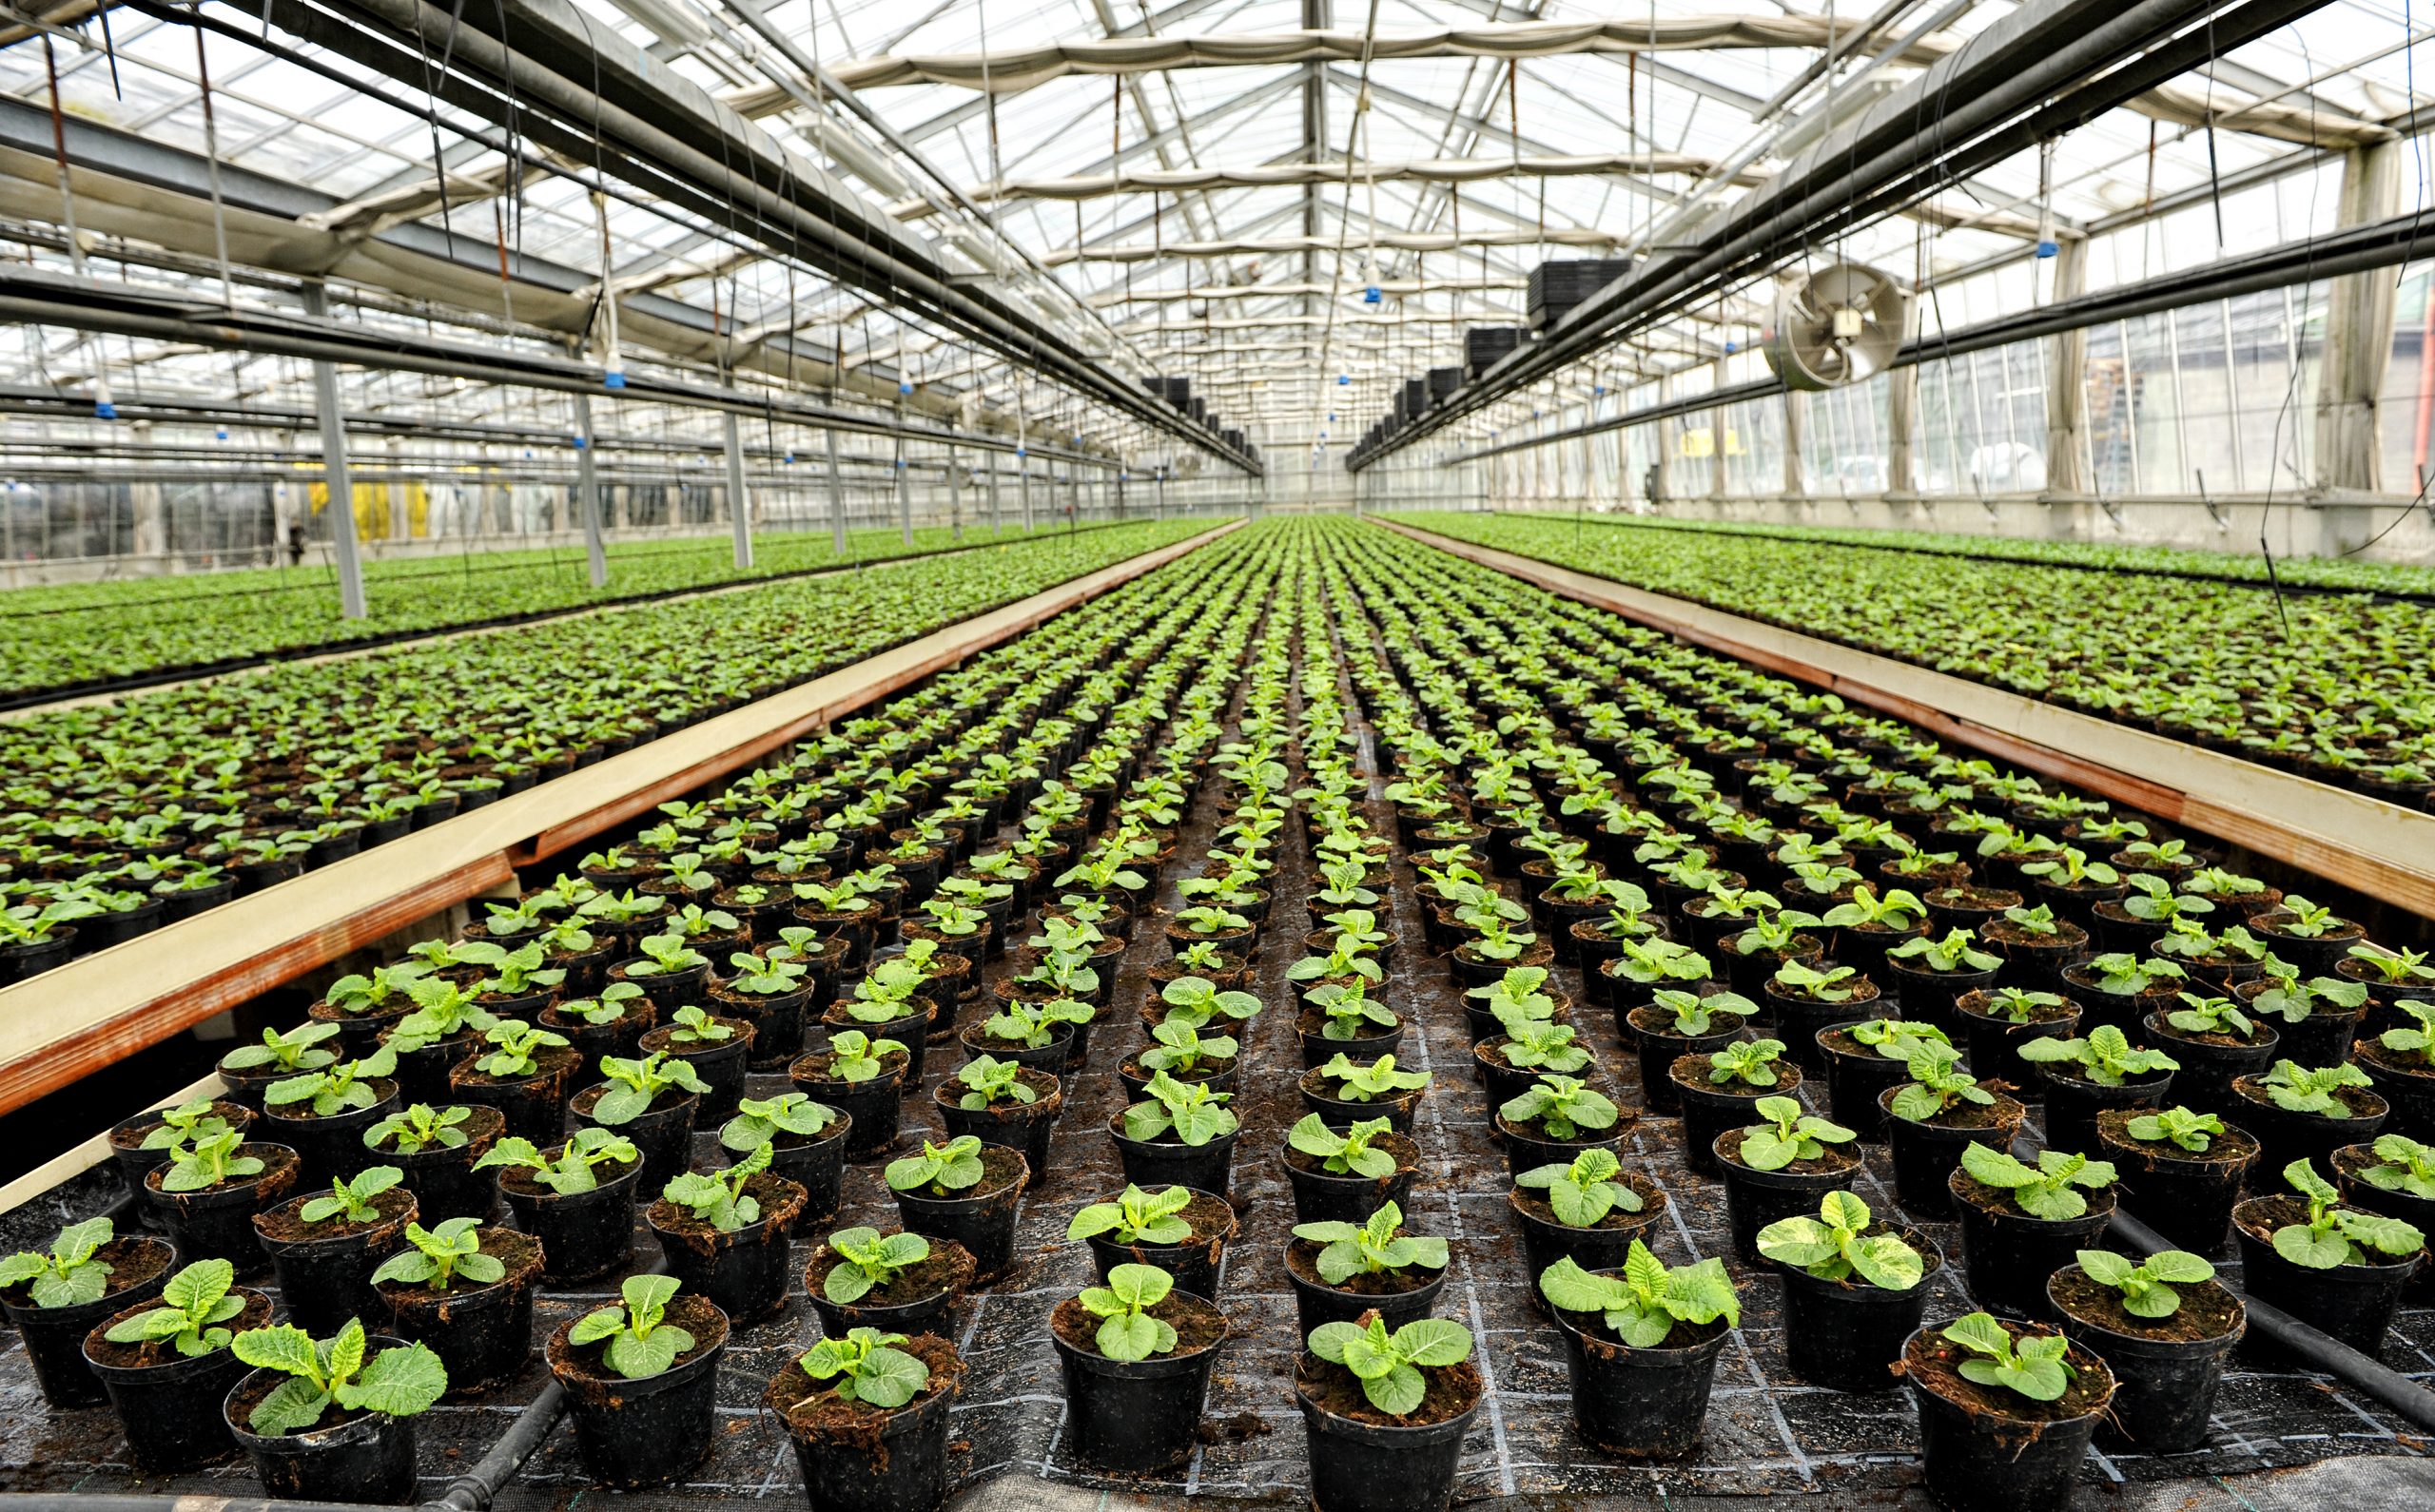 Interior of a commercial greenhouse for cultivating potted houseplants for retail with rows of green seedlings stretching back into the distance